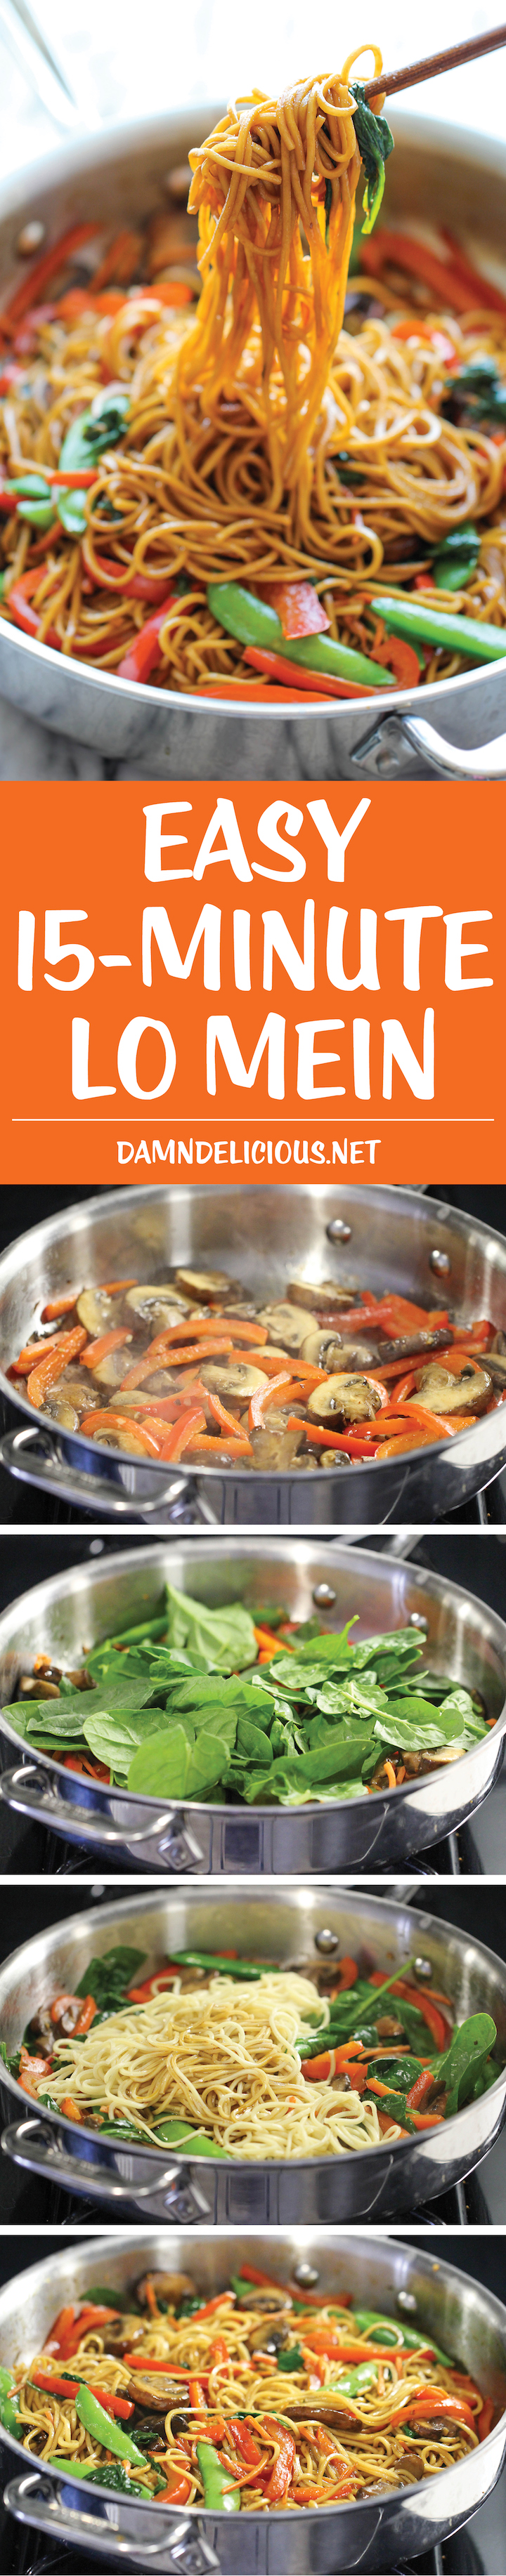 Easy Lo Mein - The easiest lo mein you will ever make in 15 minutes from start to finish. It is so much quicker, tastier and healthier than take-out!